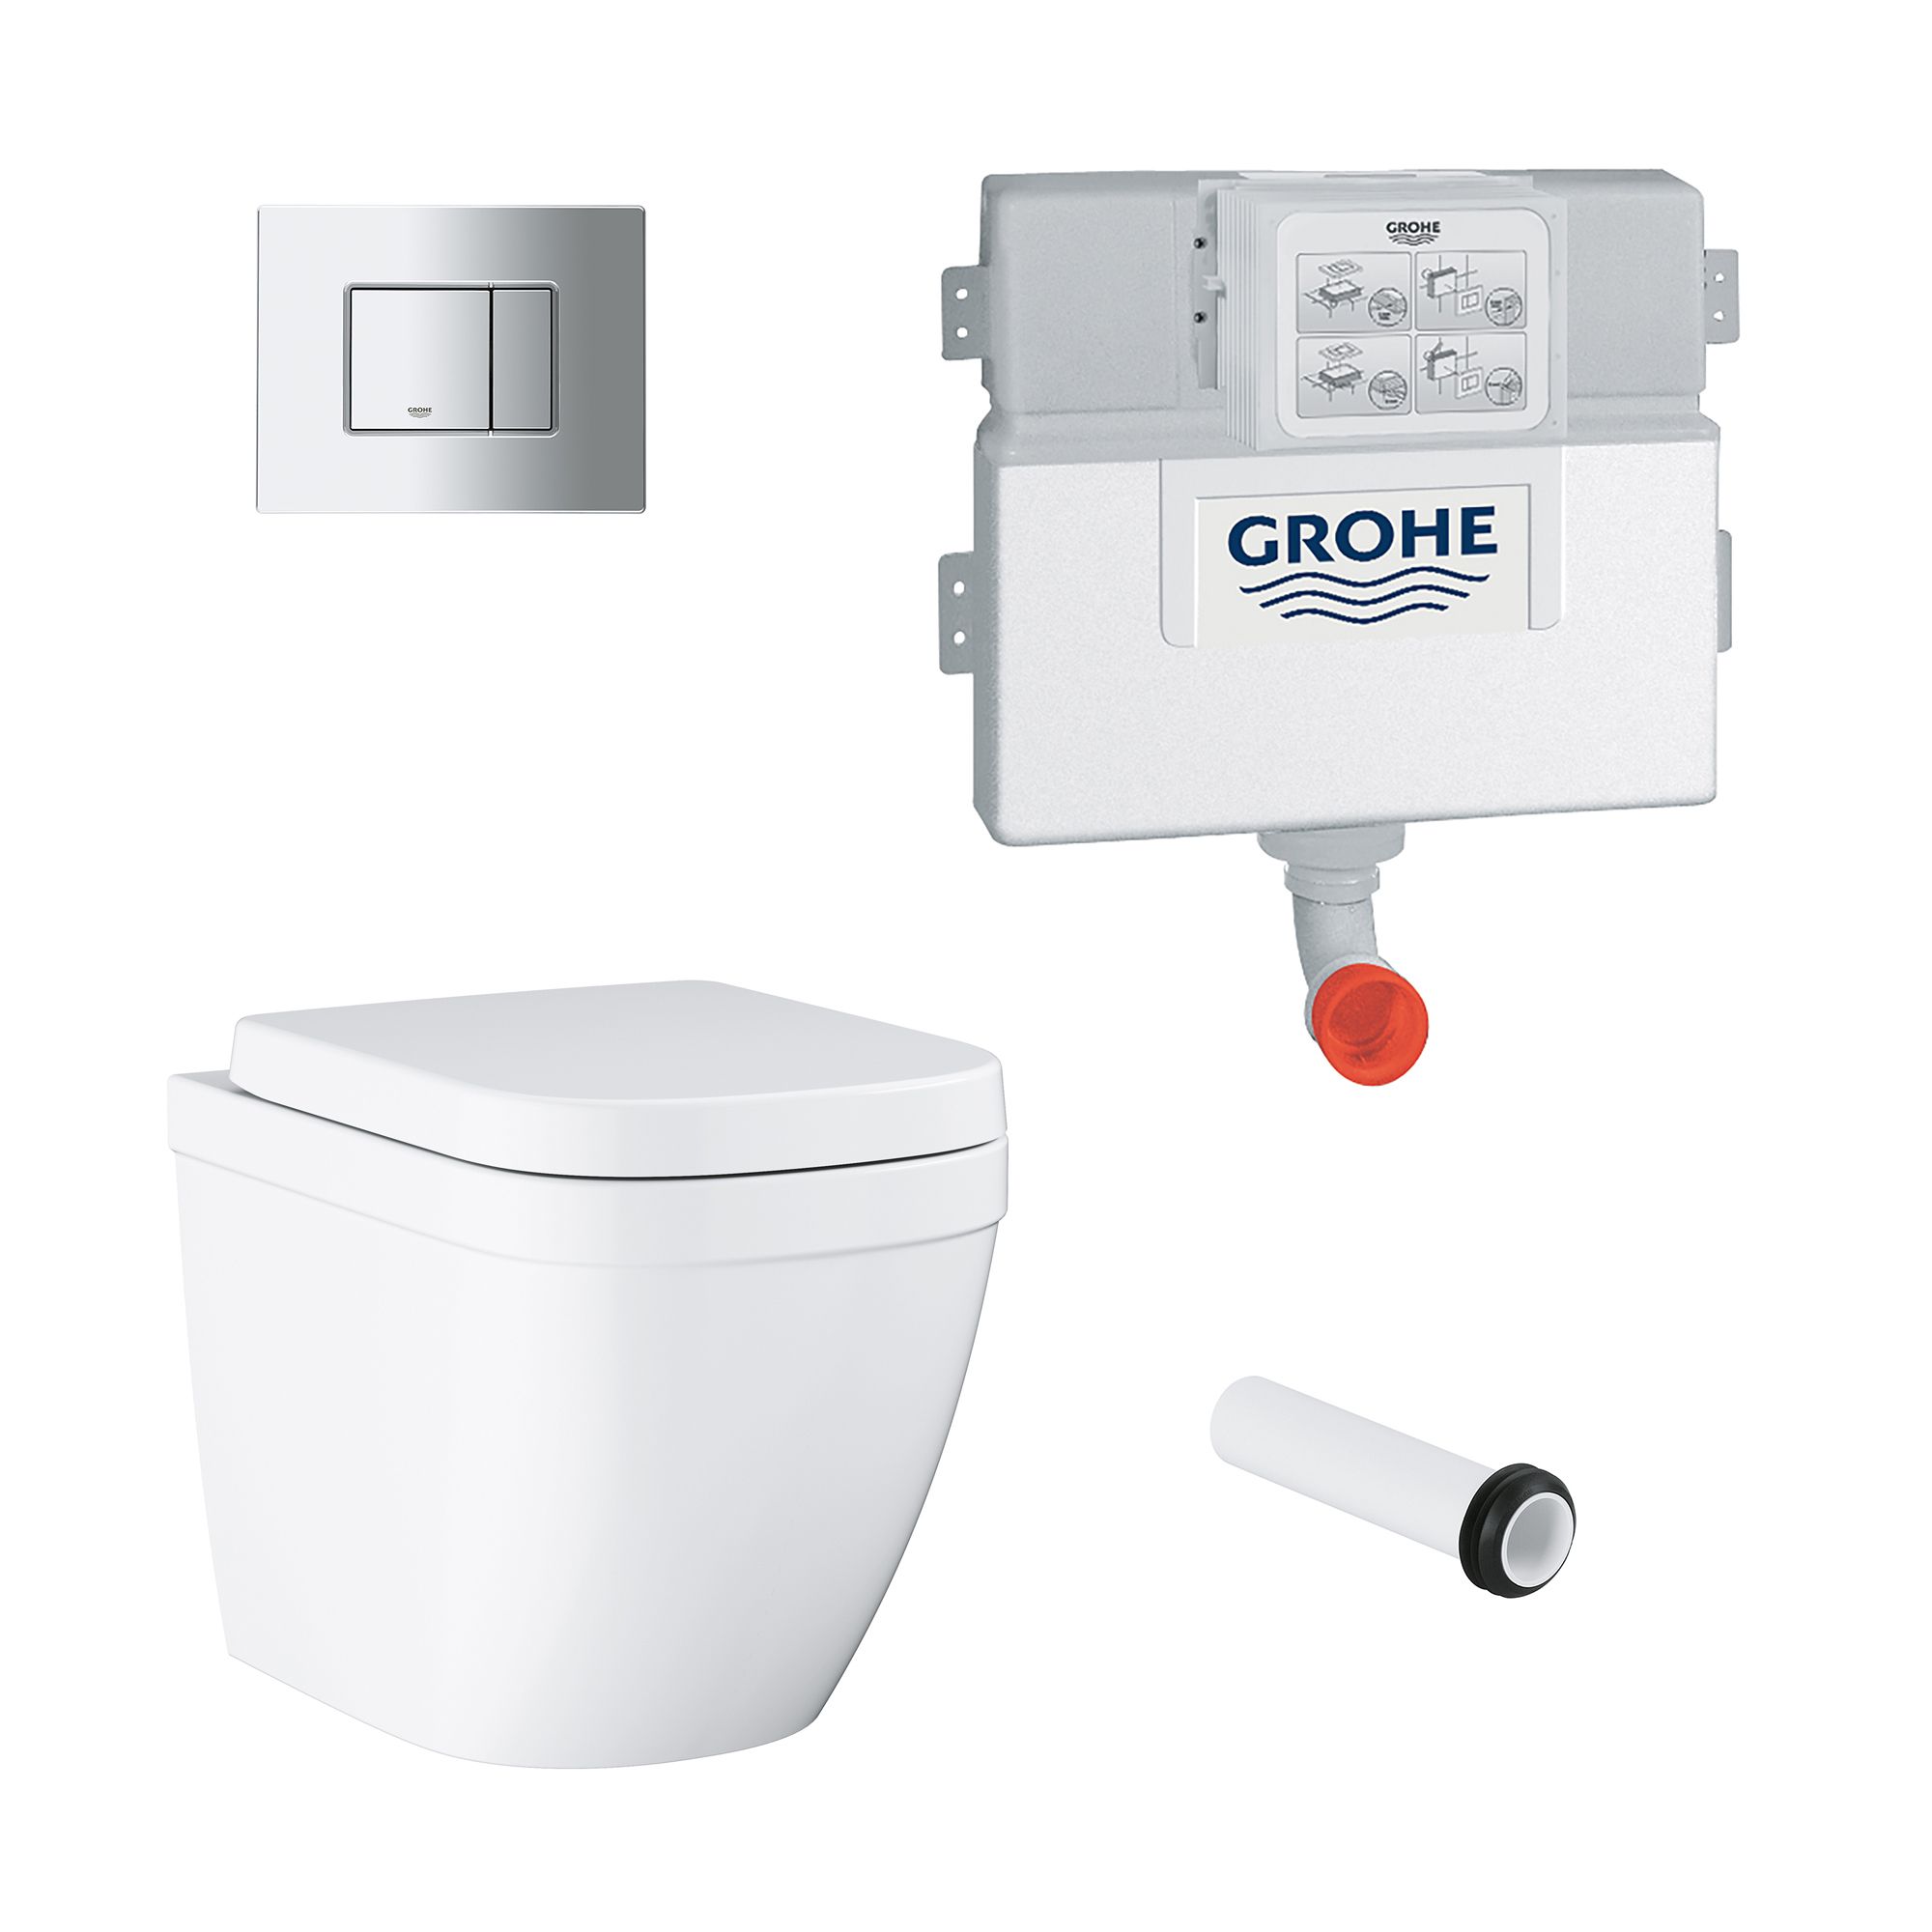 Grohe Even & Euro Contemporary Back to wall Rimless Standard Toilet & cistern with Soft close seat | DIY at